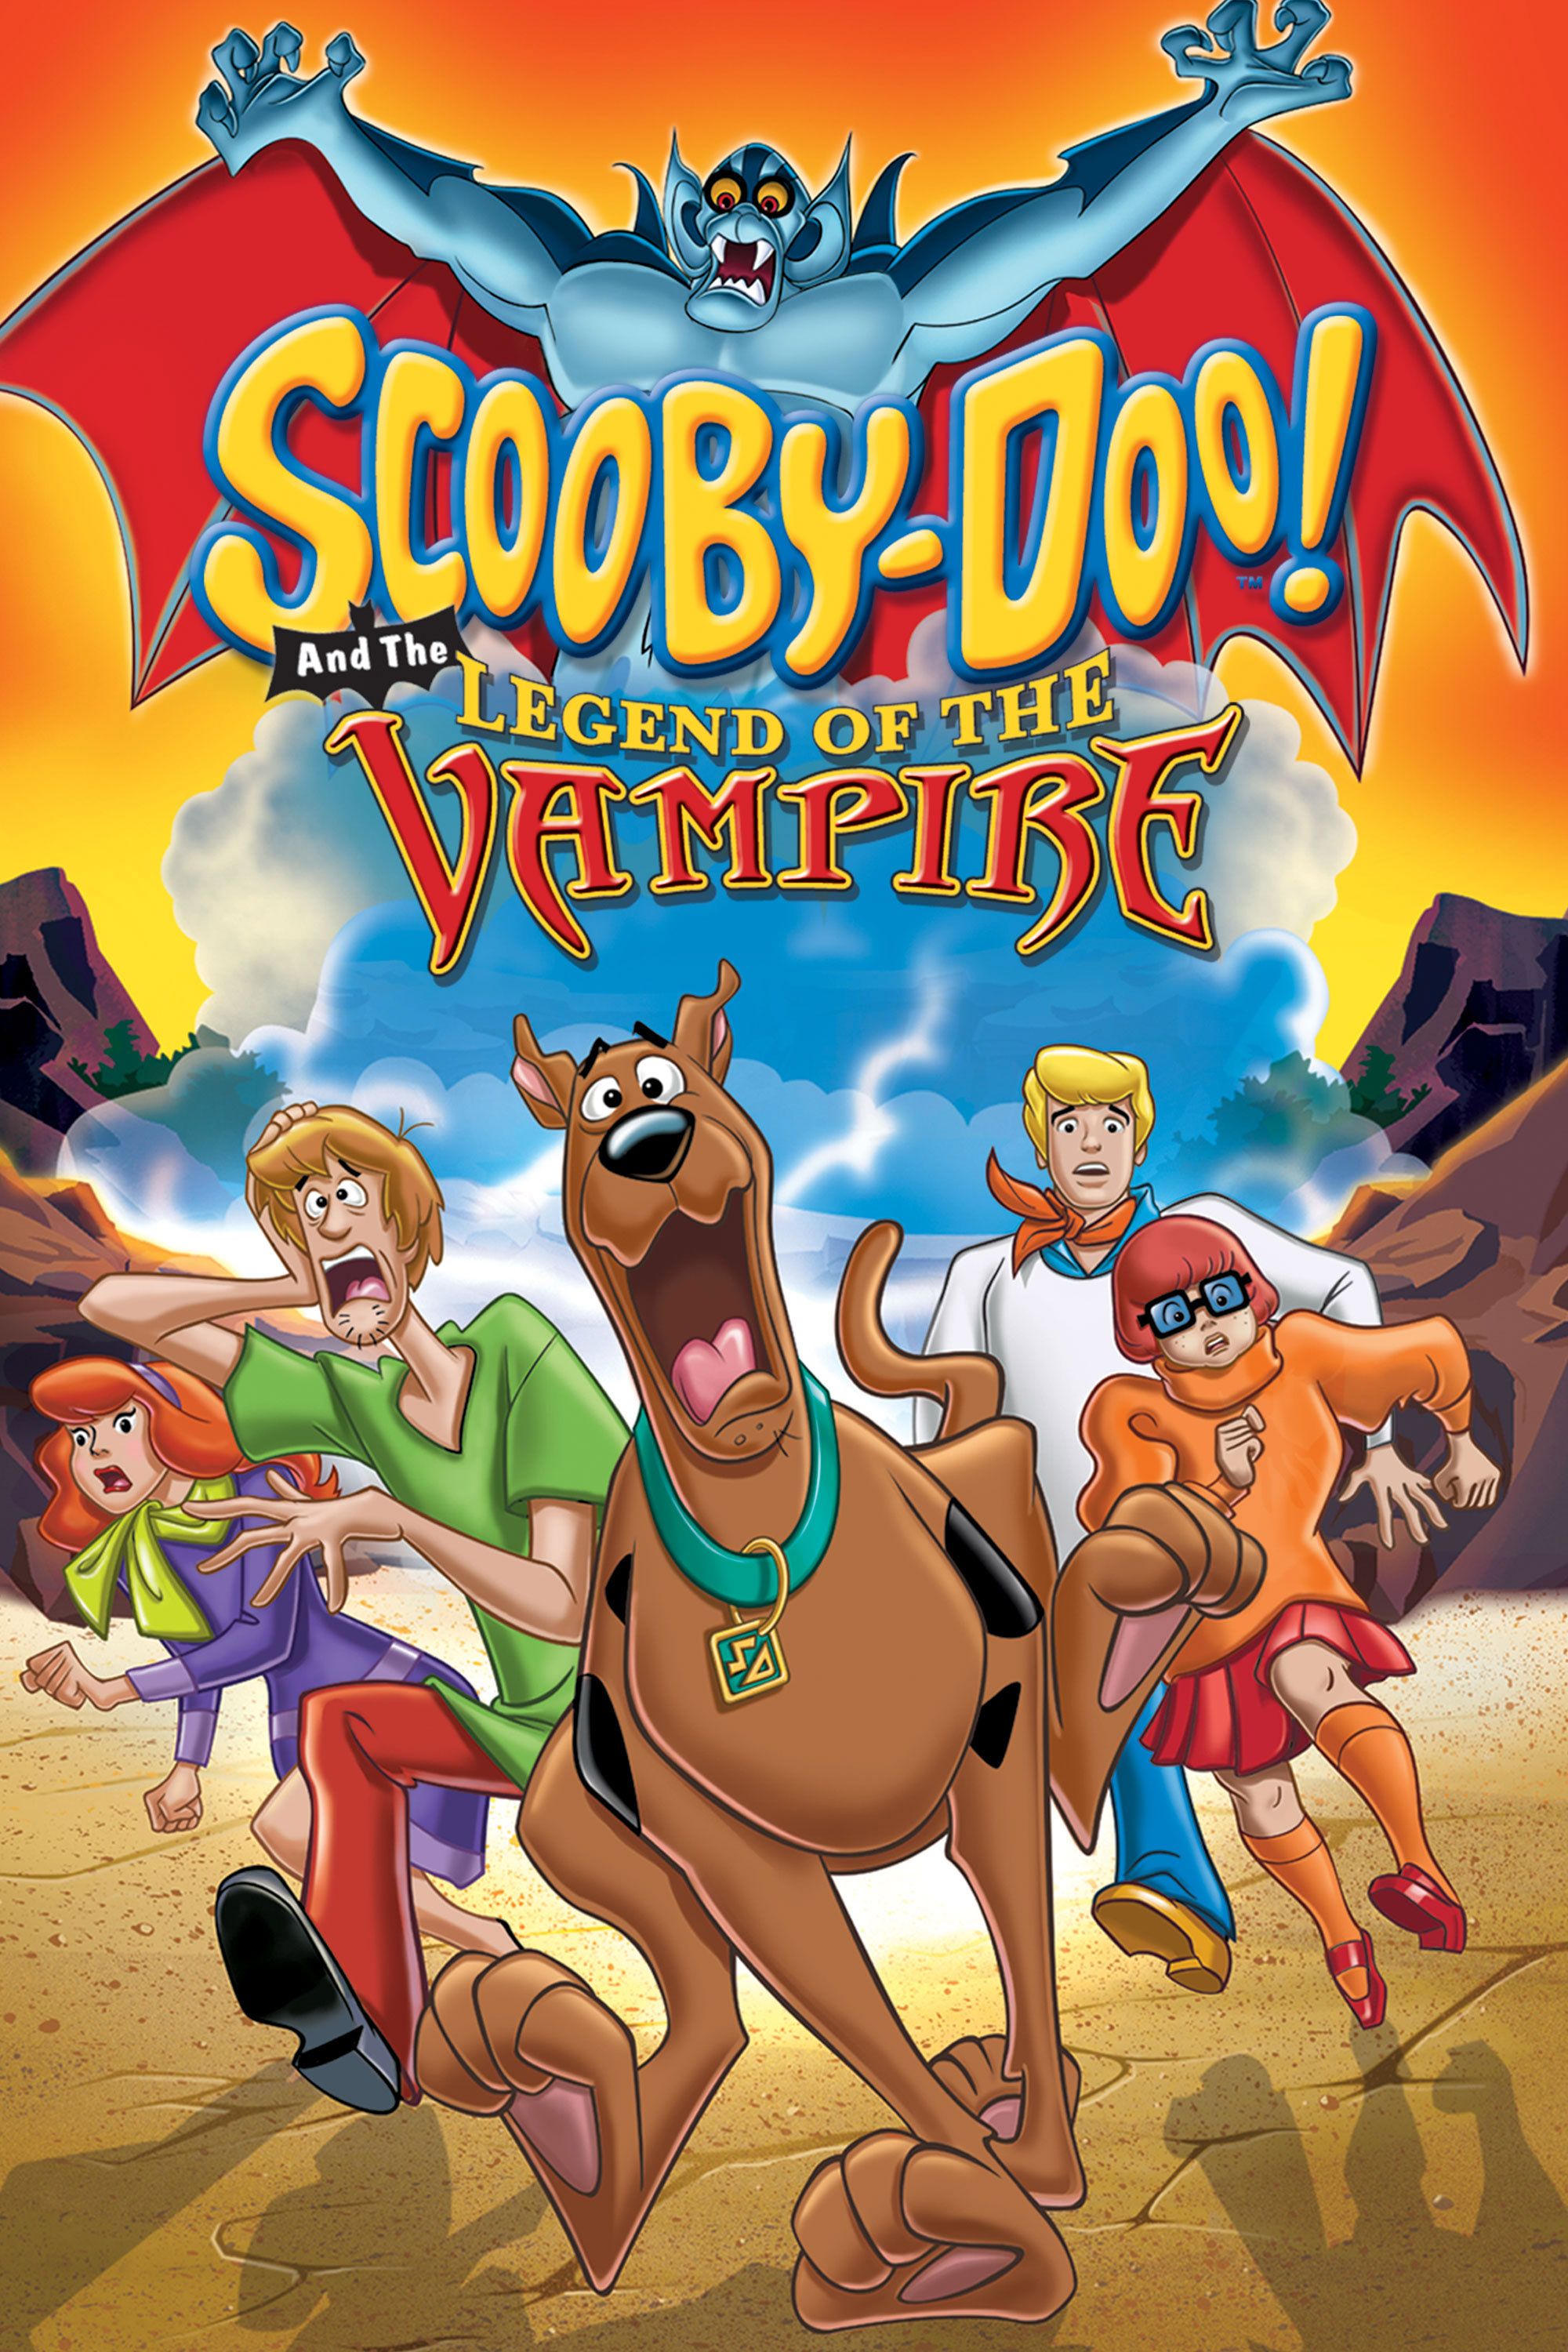 Scooby doo and the legend of the vampire